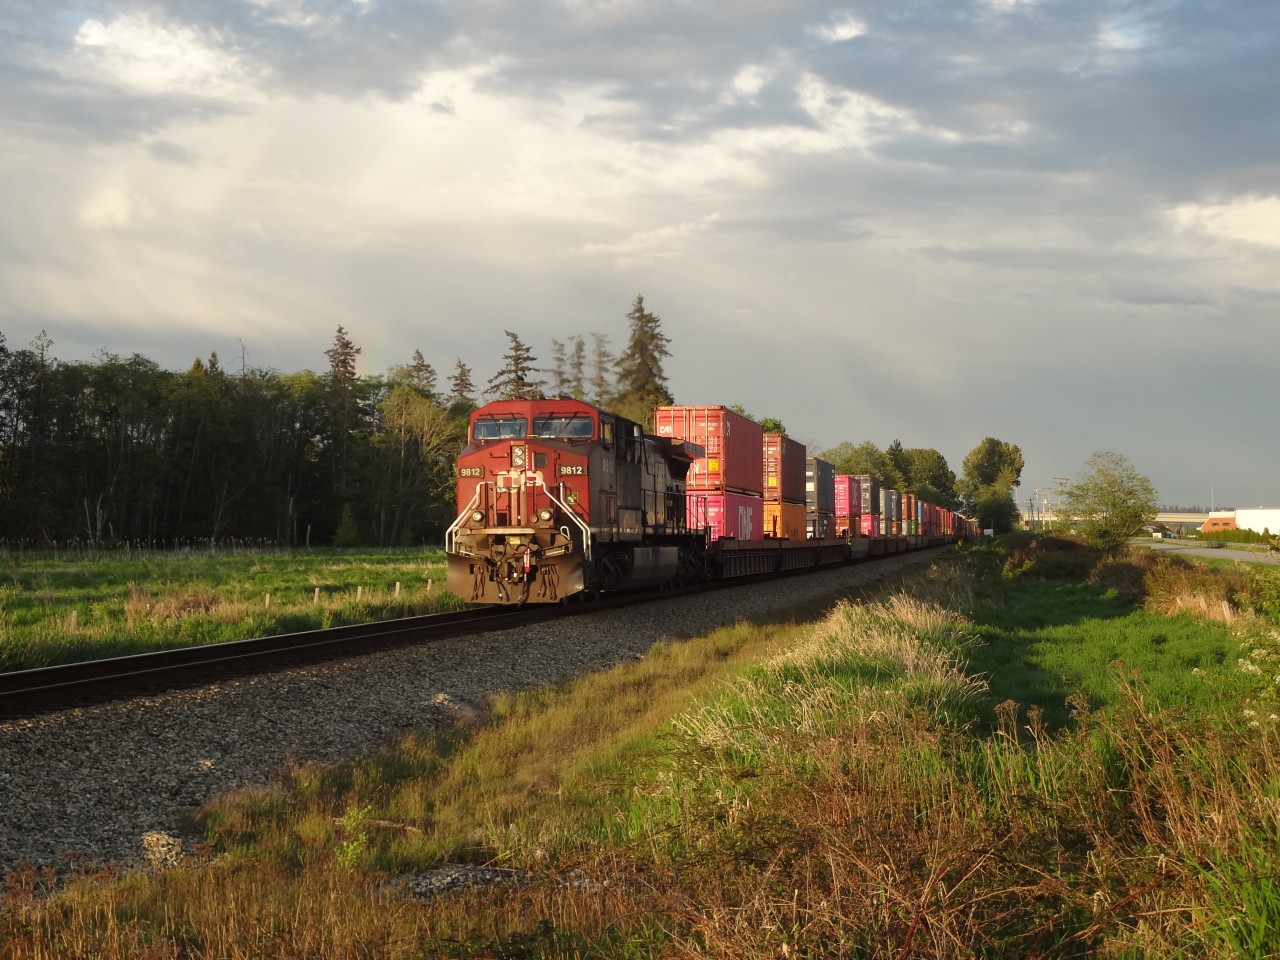 Railpictures.ca - Colin Ritchie Photo: Early evening ...